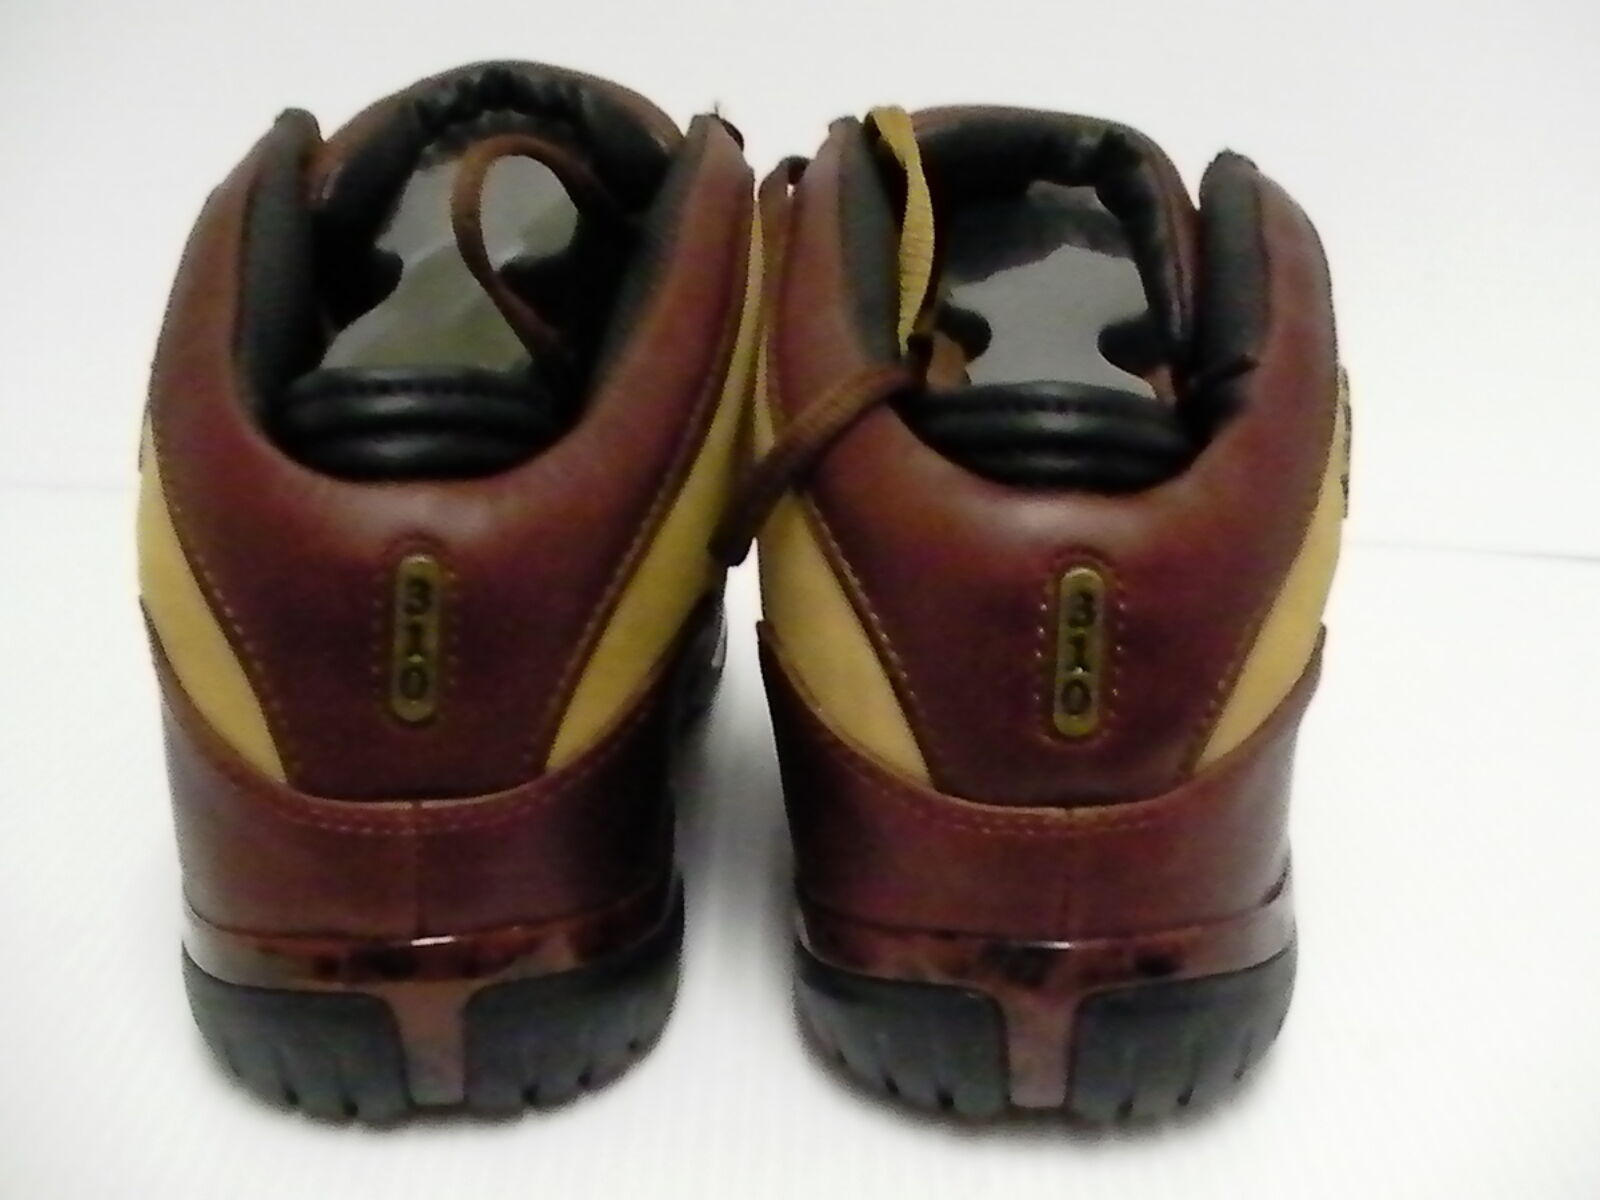 Mens 310 Motoring shoes BC 4000 Luggage Boots 31112 size 13 us - Casual